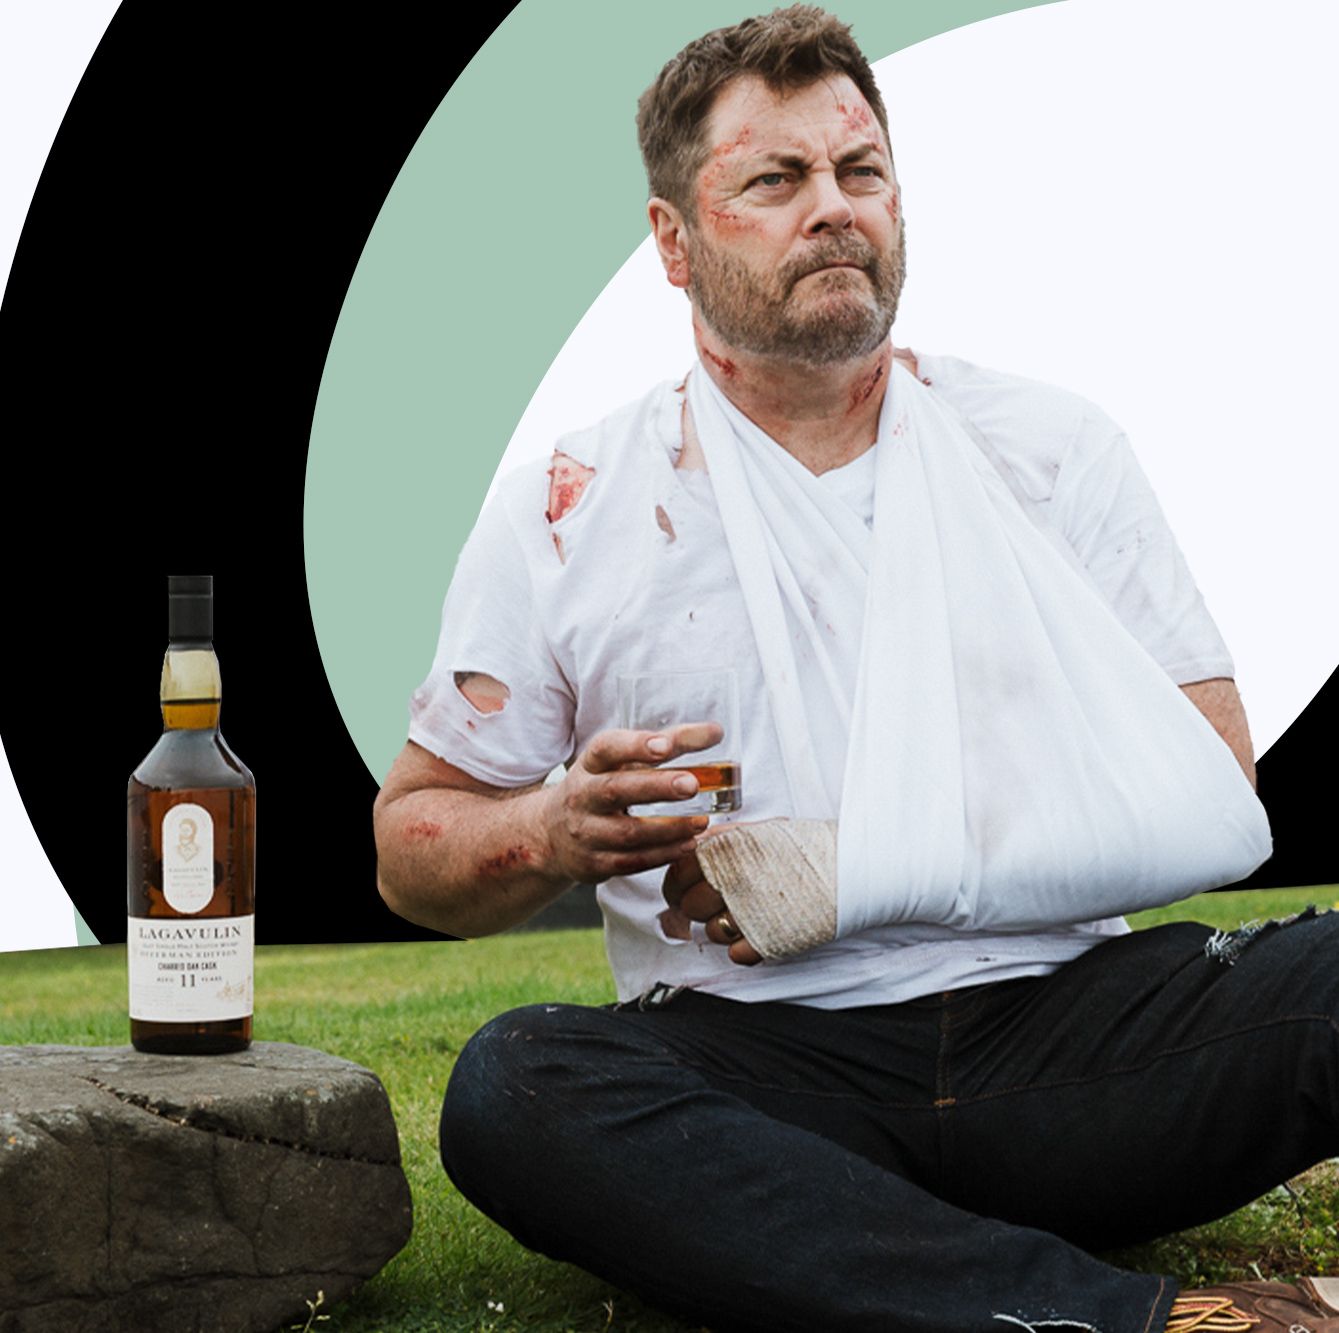 A Scotch-Fueled Conversation With Nick Offerman